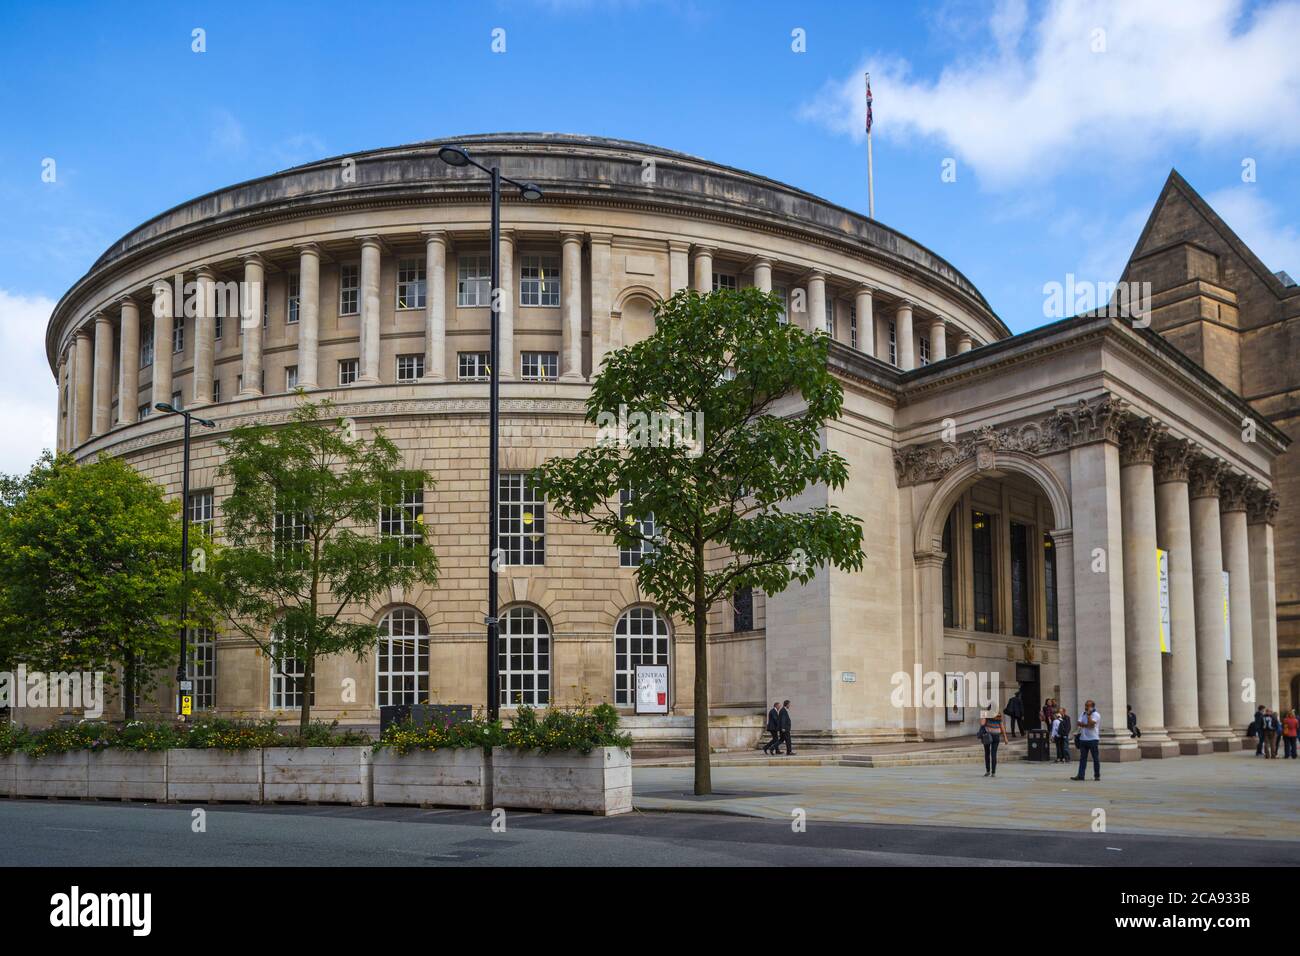 Manchester Central Library, Manchester, England, United Kingdom, Europe Stock Photo